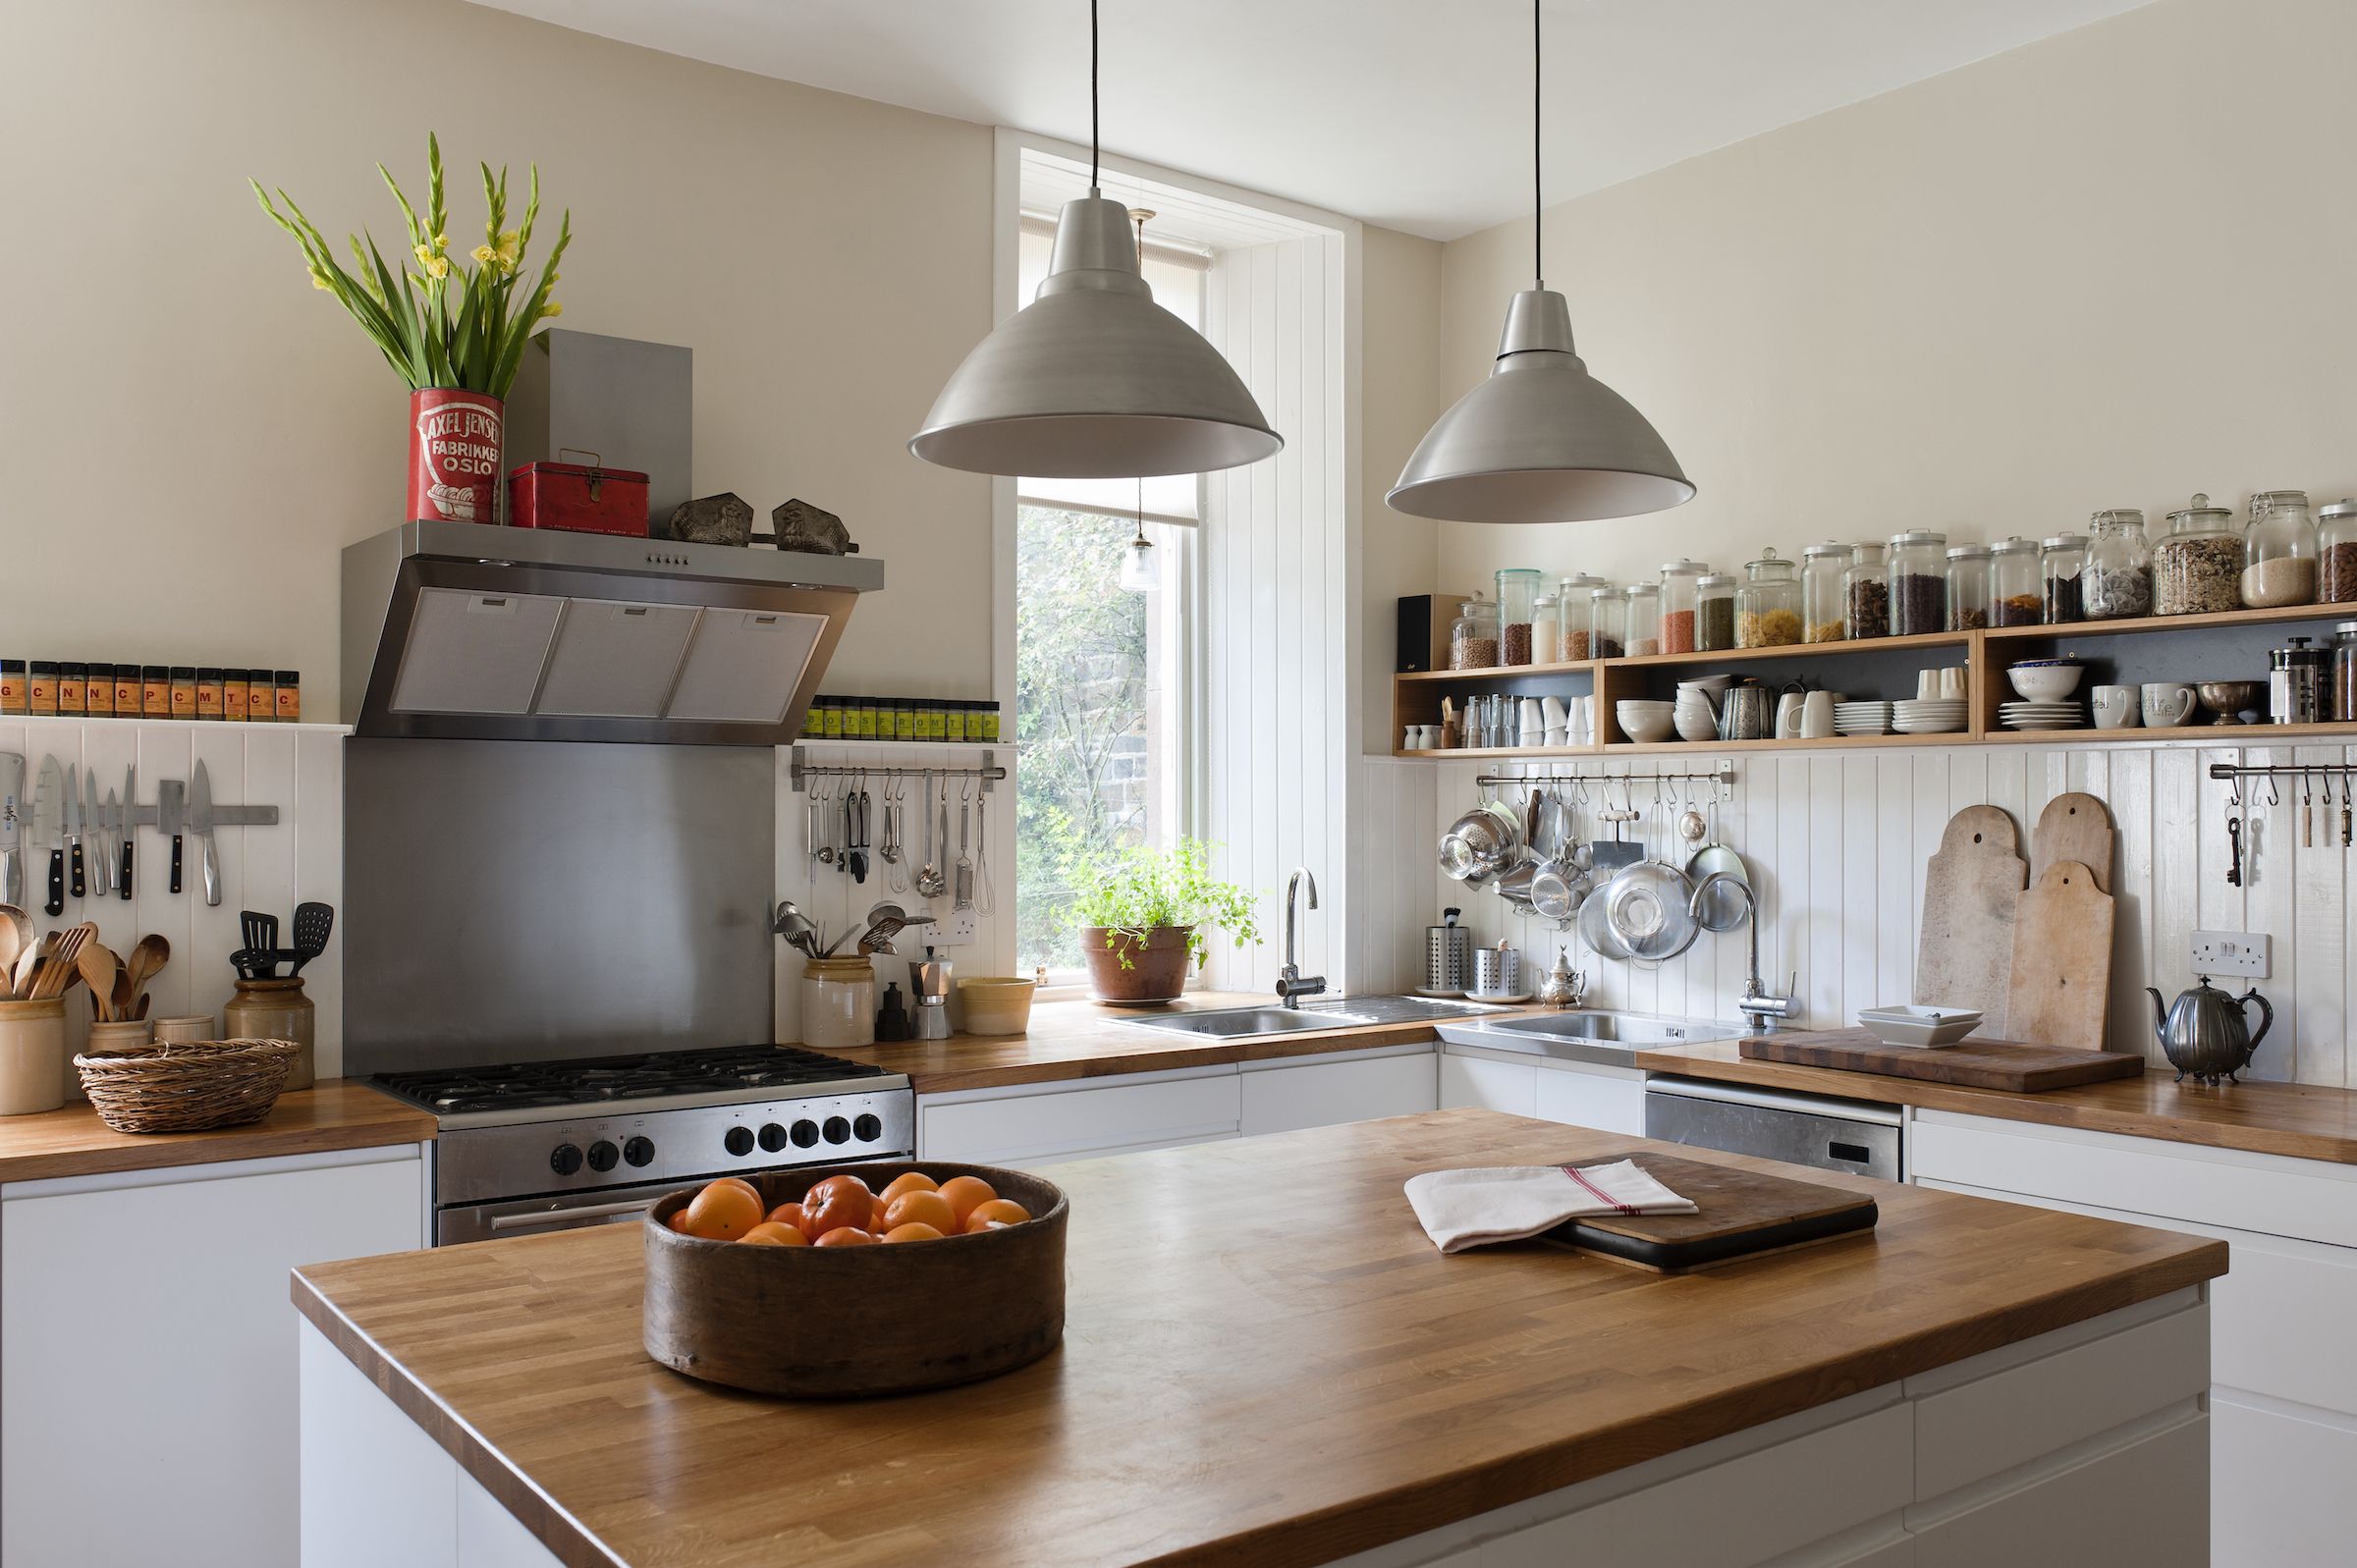 6 Best Countertops for Kitchens in